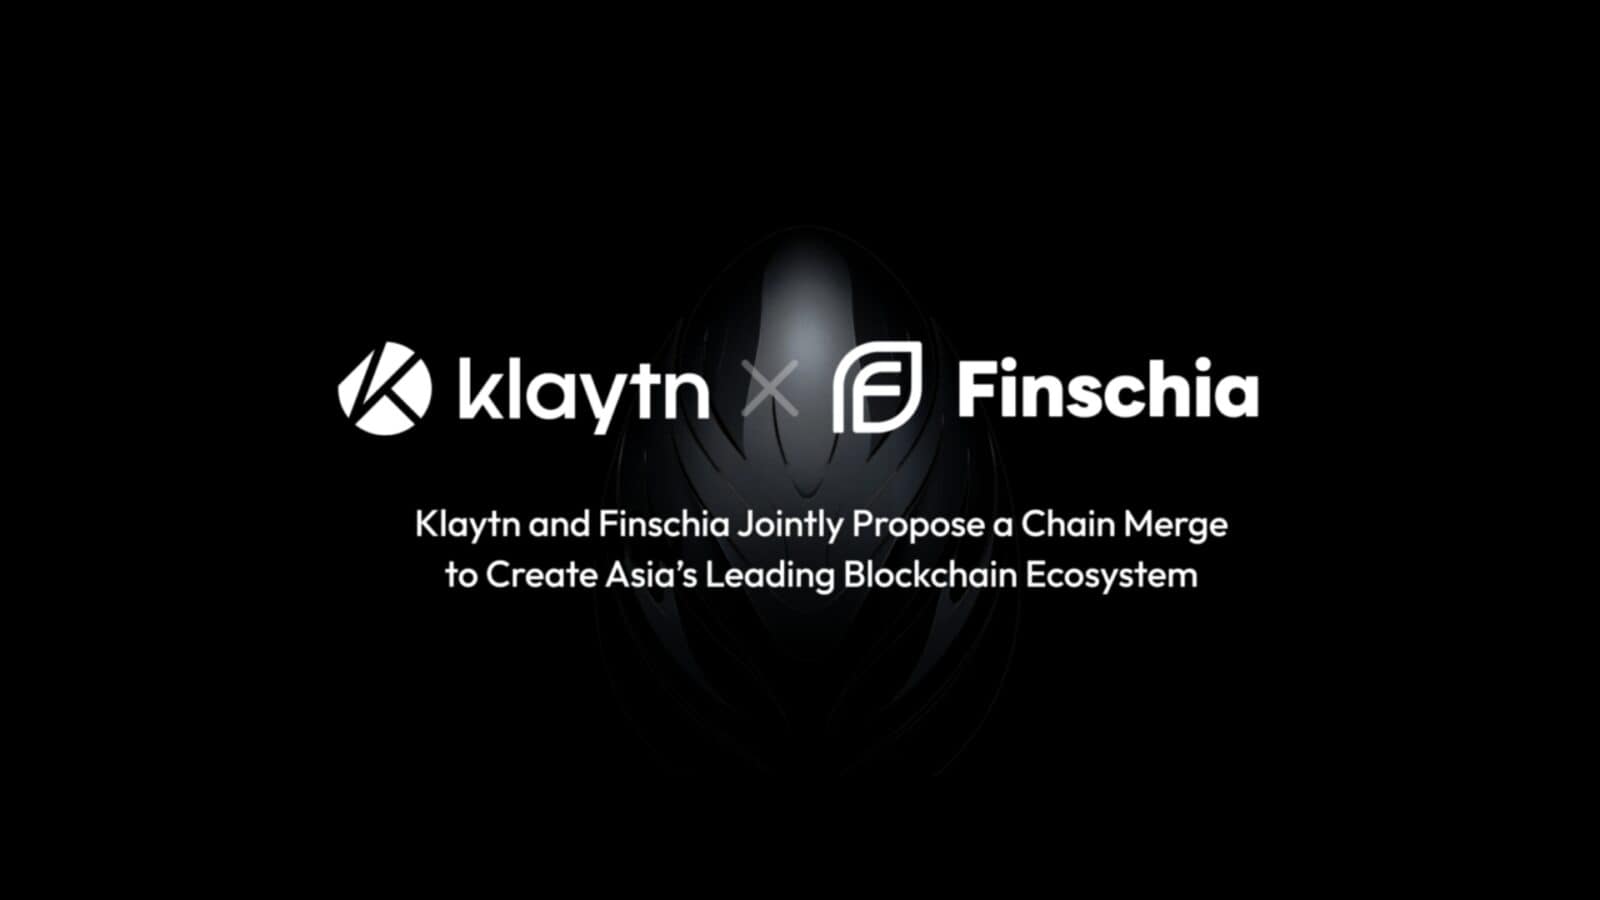 Klaytn and Finschia Merge to Develop a Technologically Superior Blockchain